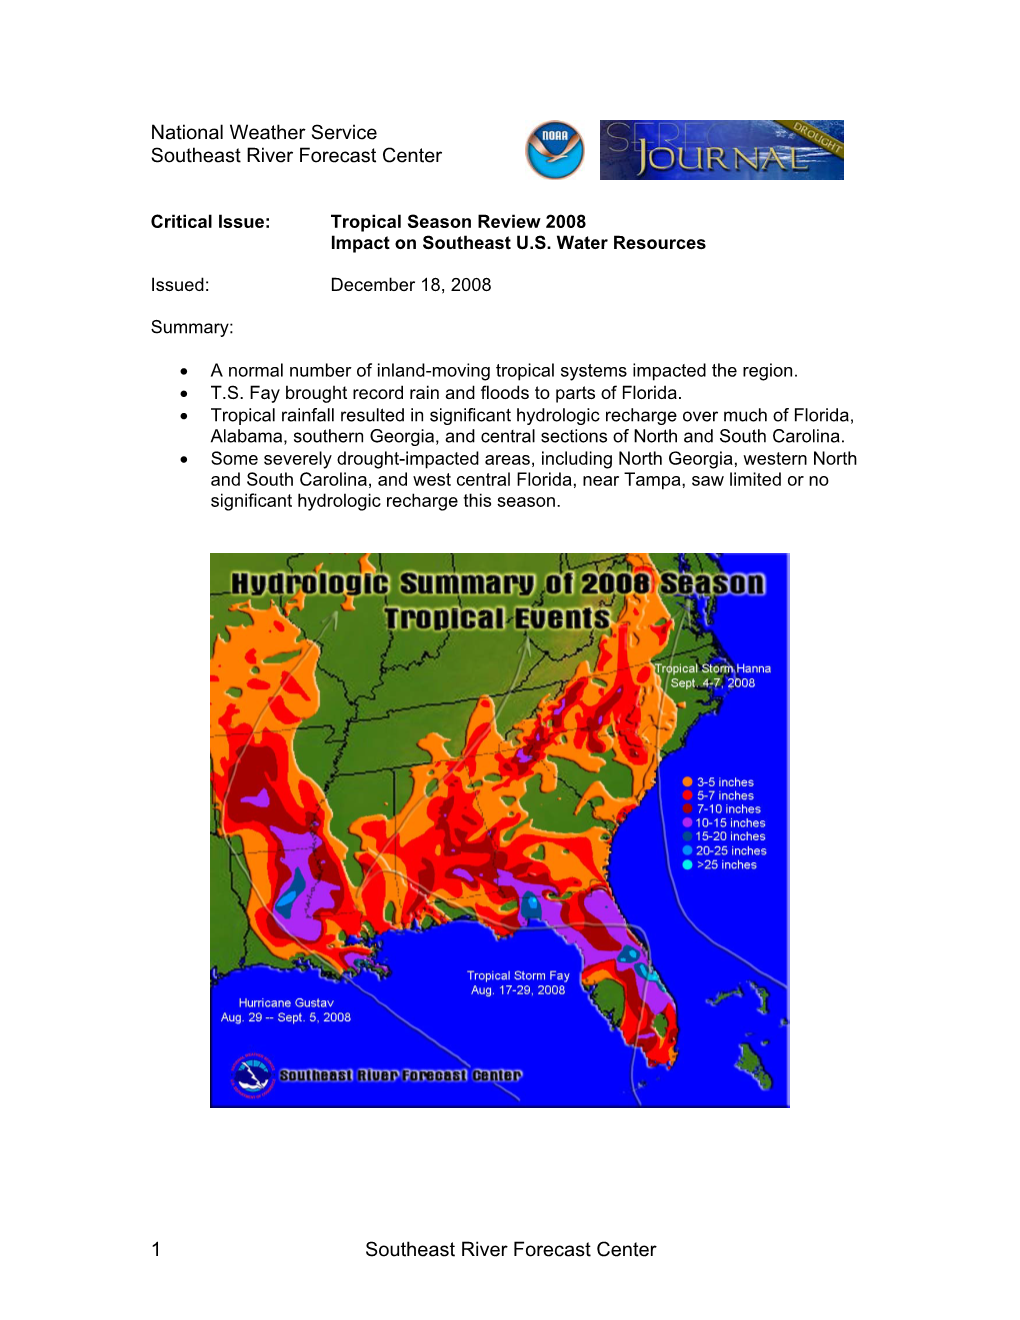 National Weather Service Southeast River Forecast Center